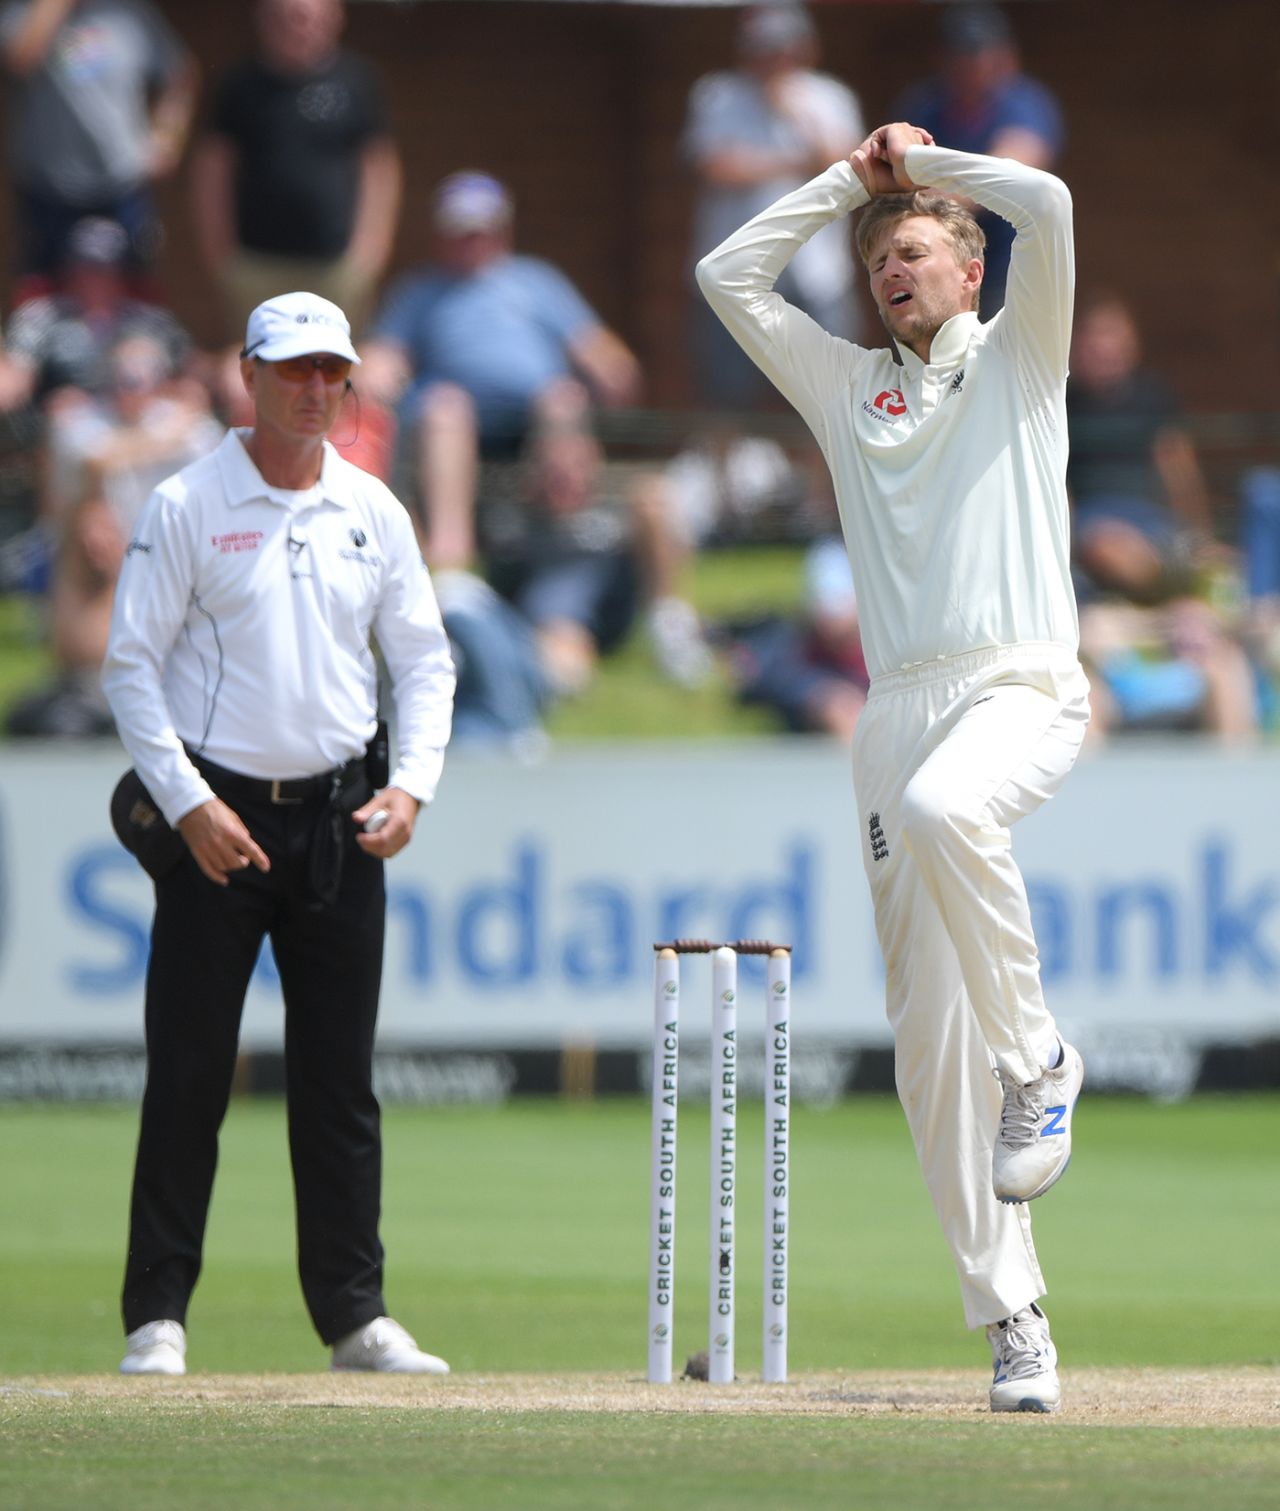 Joe Root conceded 28 runs in a single over, South Africa v England, 3rd Test, Port Elizabeth, 5th day, January 20, 2020